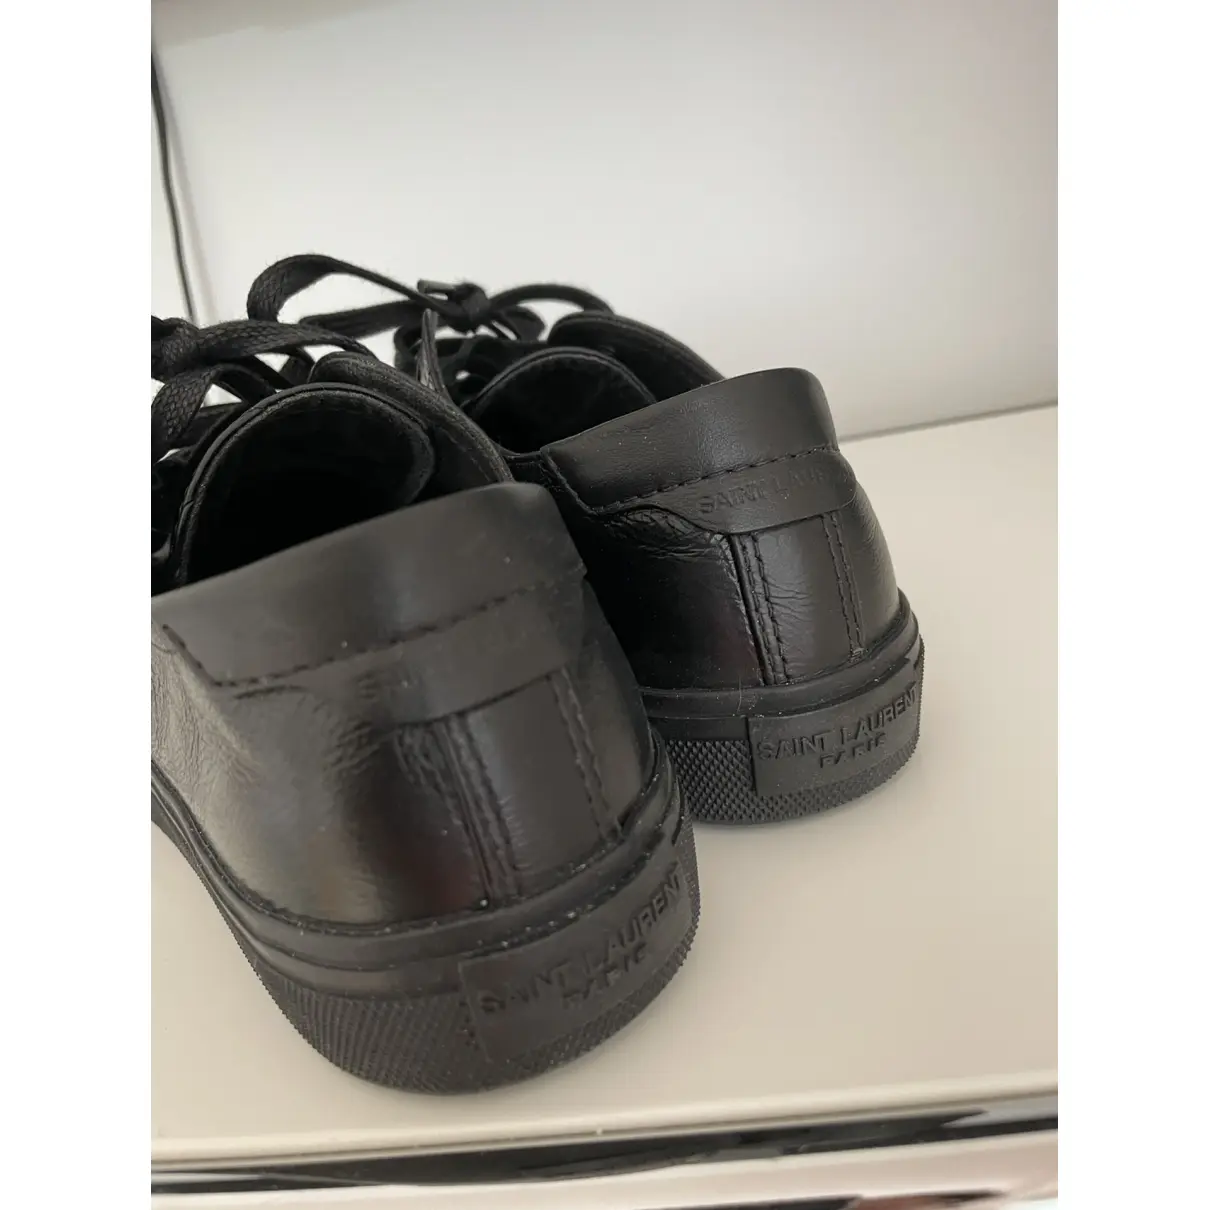 Andy leather trainers Saint Laurent